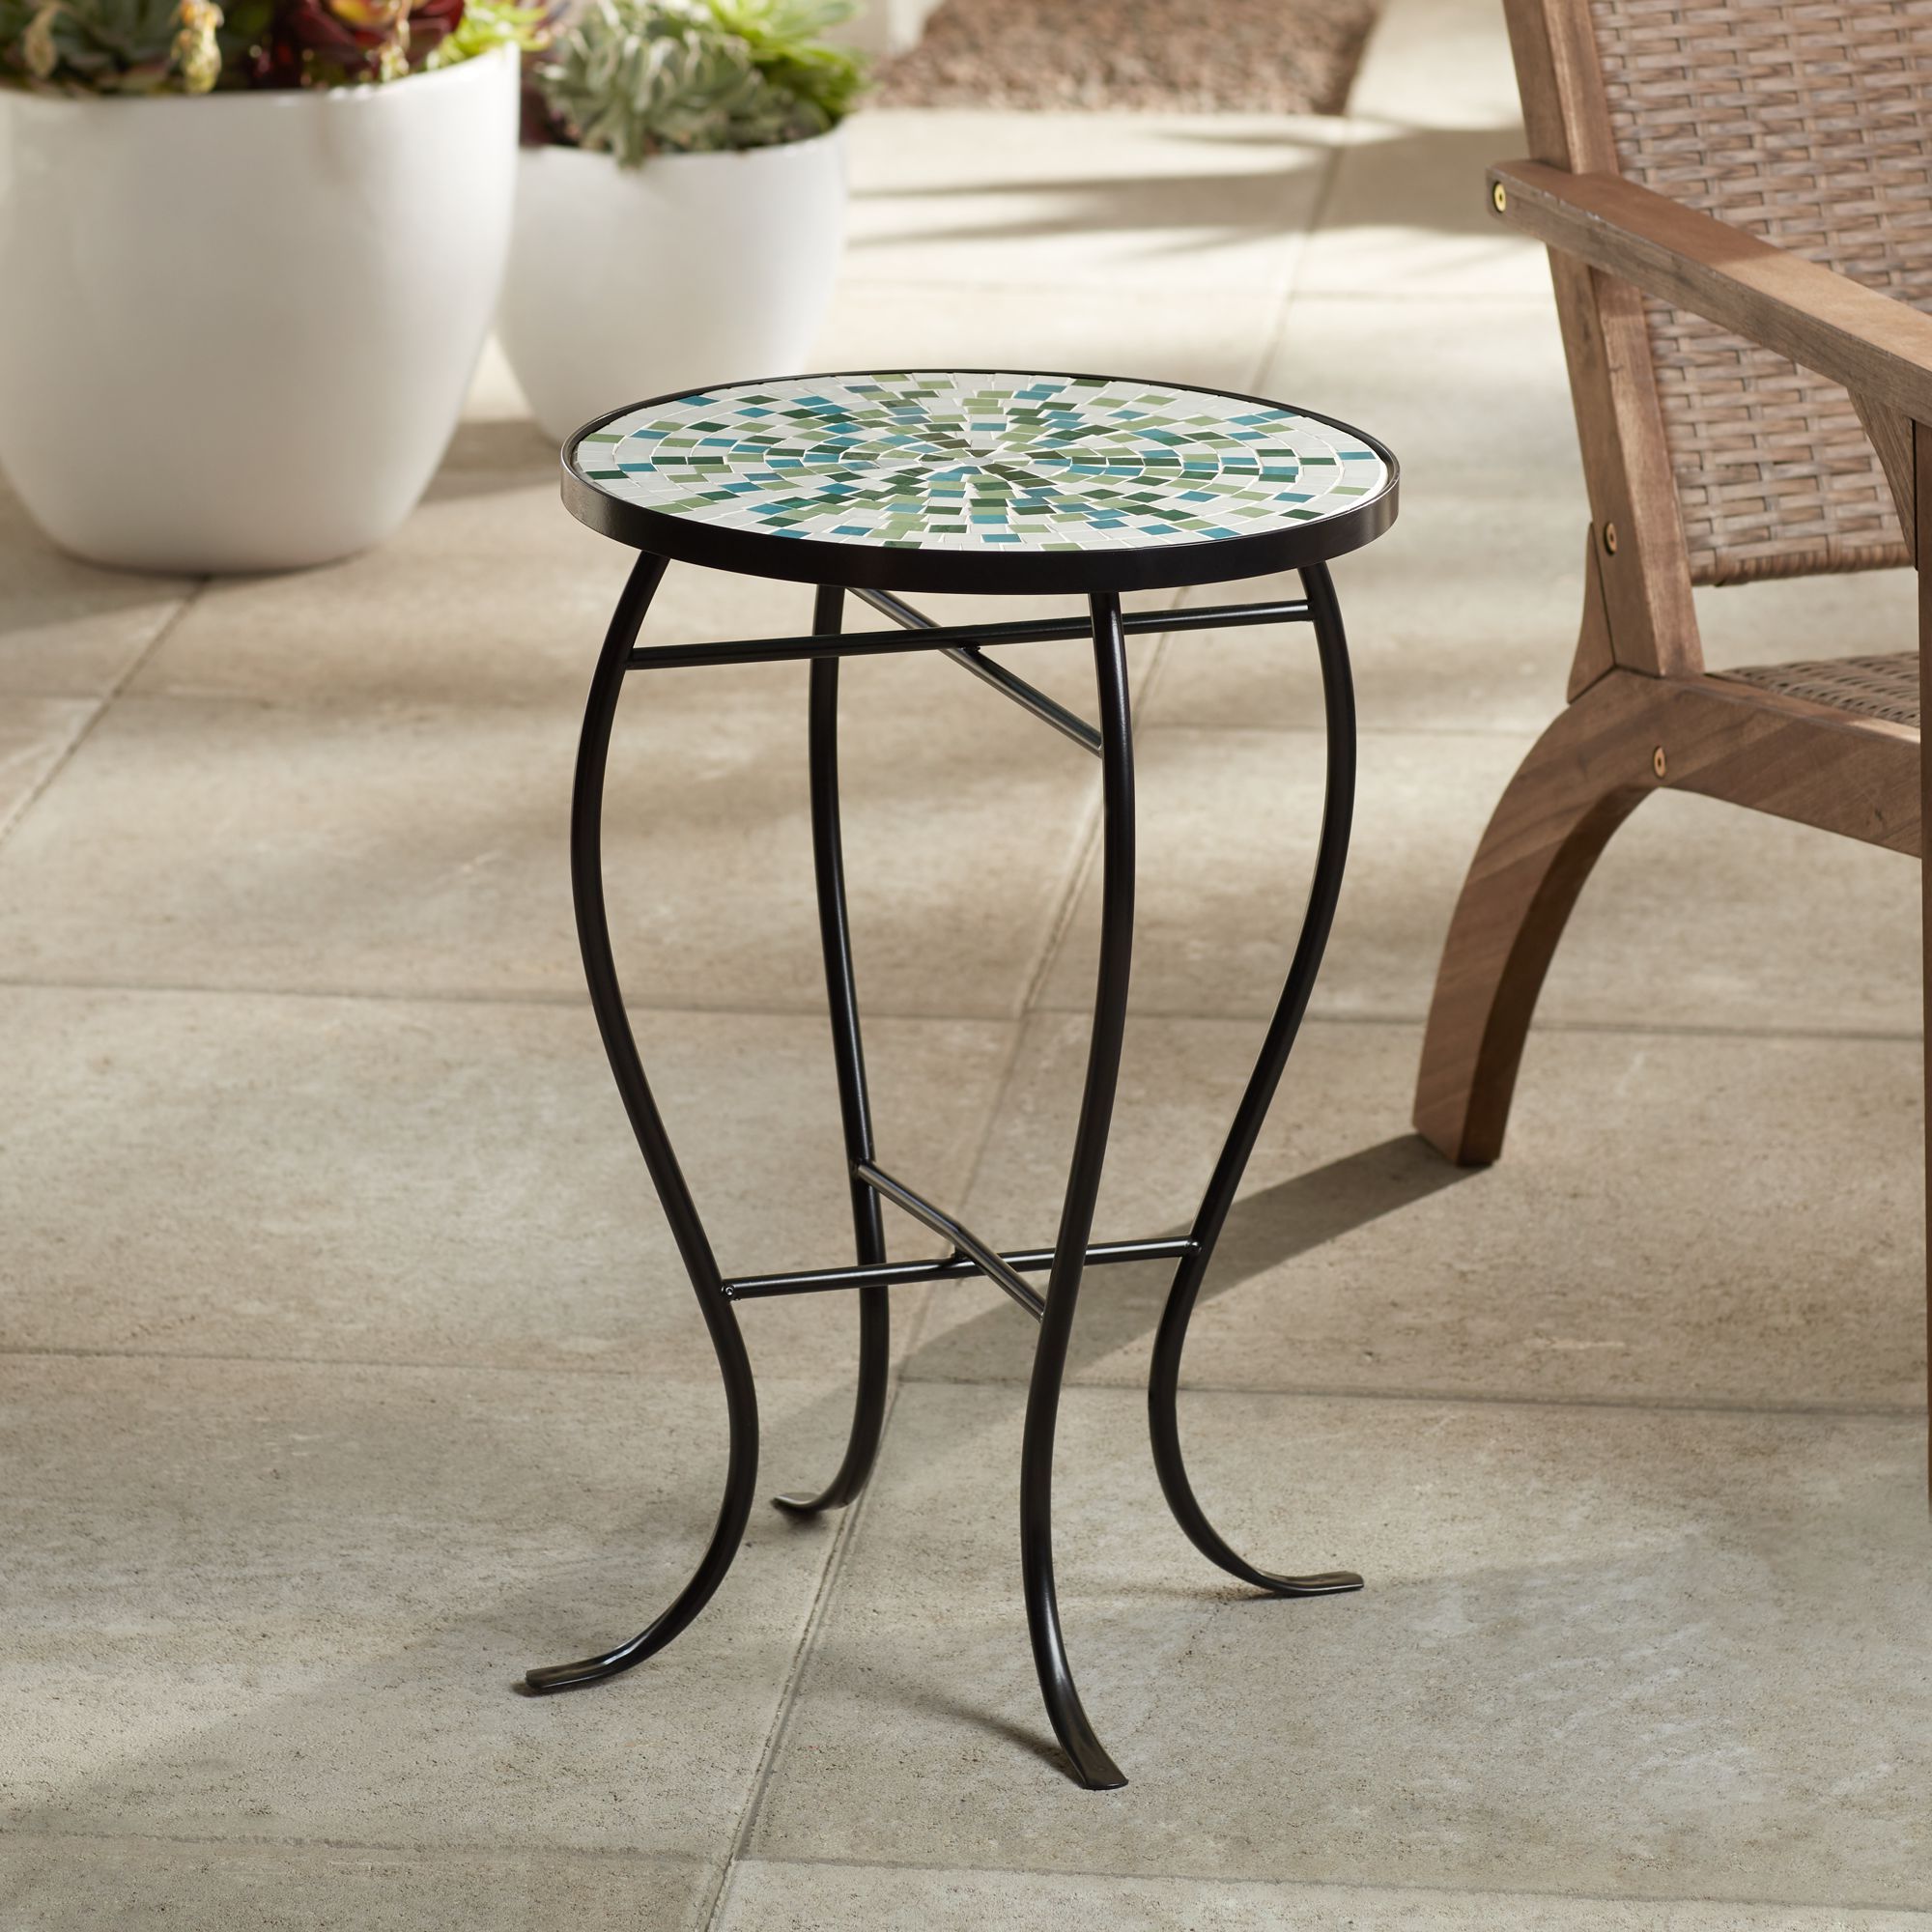 Well Known Blue Mosaic Outdoor Coffee Table : Amazon Com Teal Island Designs Blue Throughout Ocean Mosaic Outdoor Accent Tables (View 10 of 15)